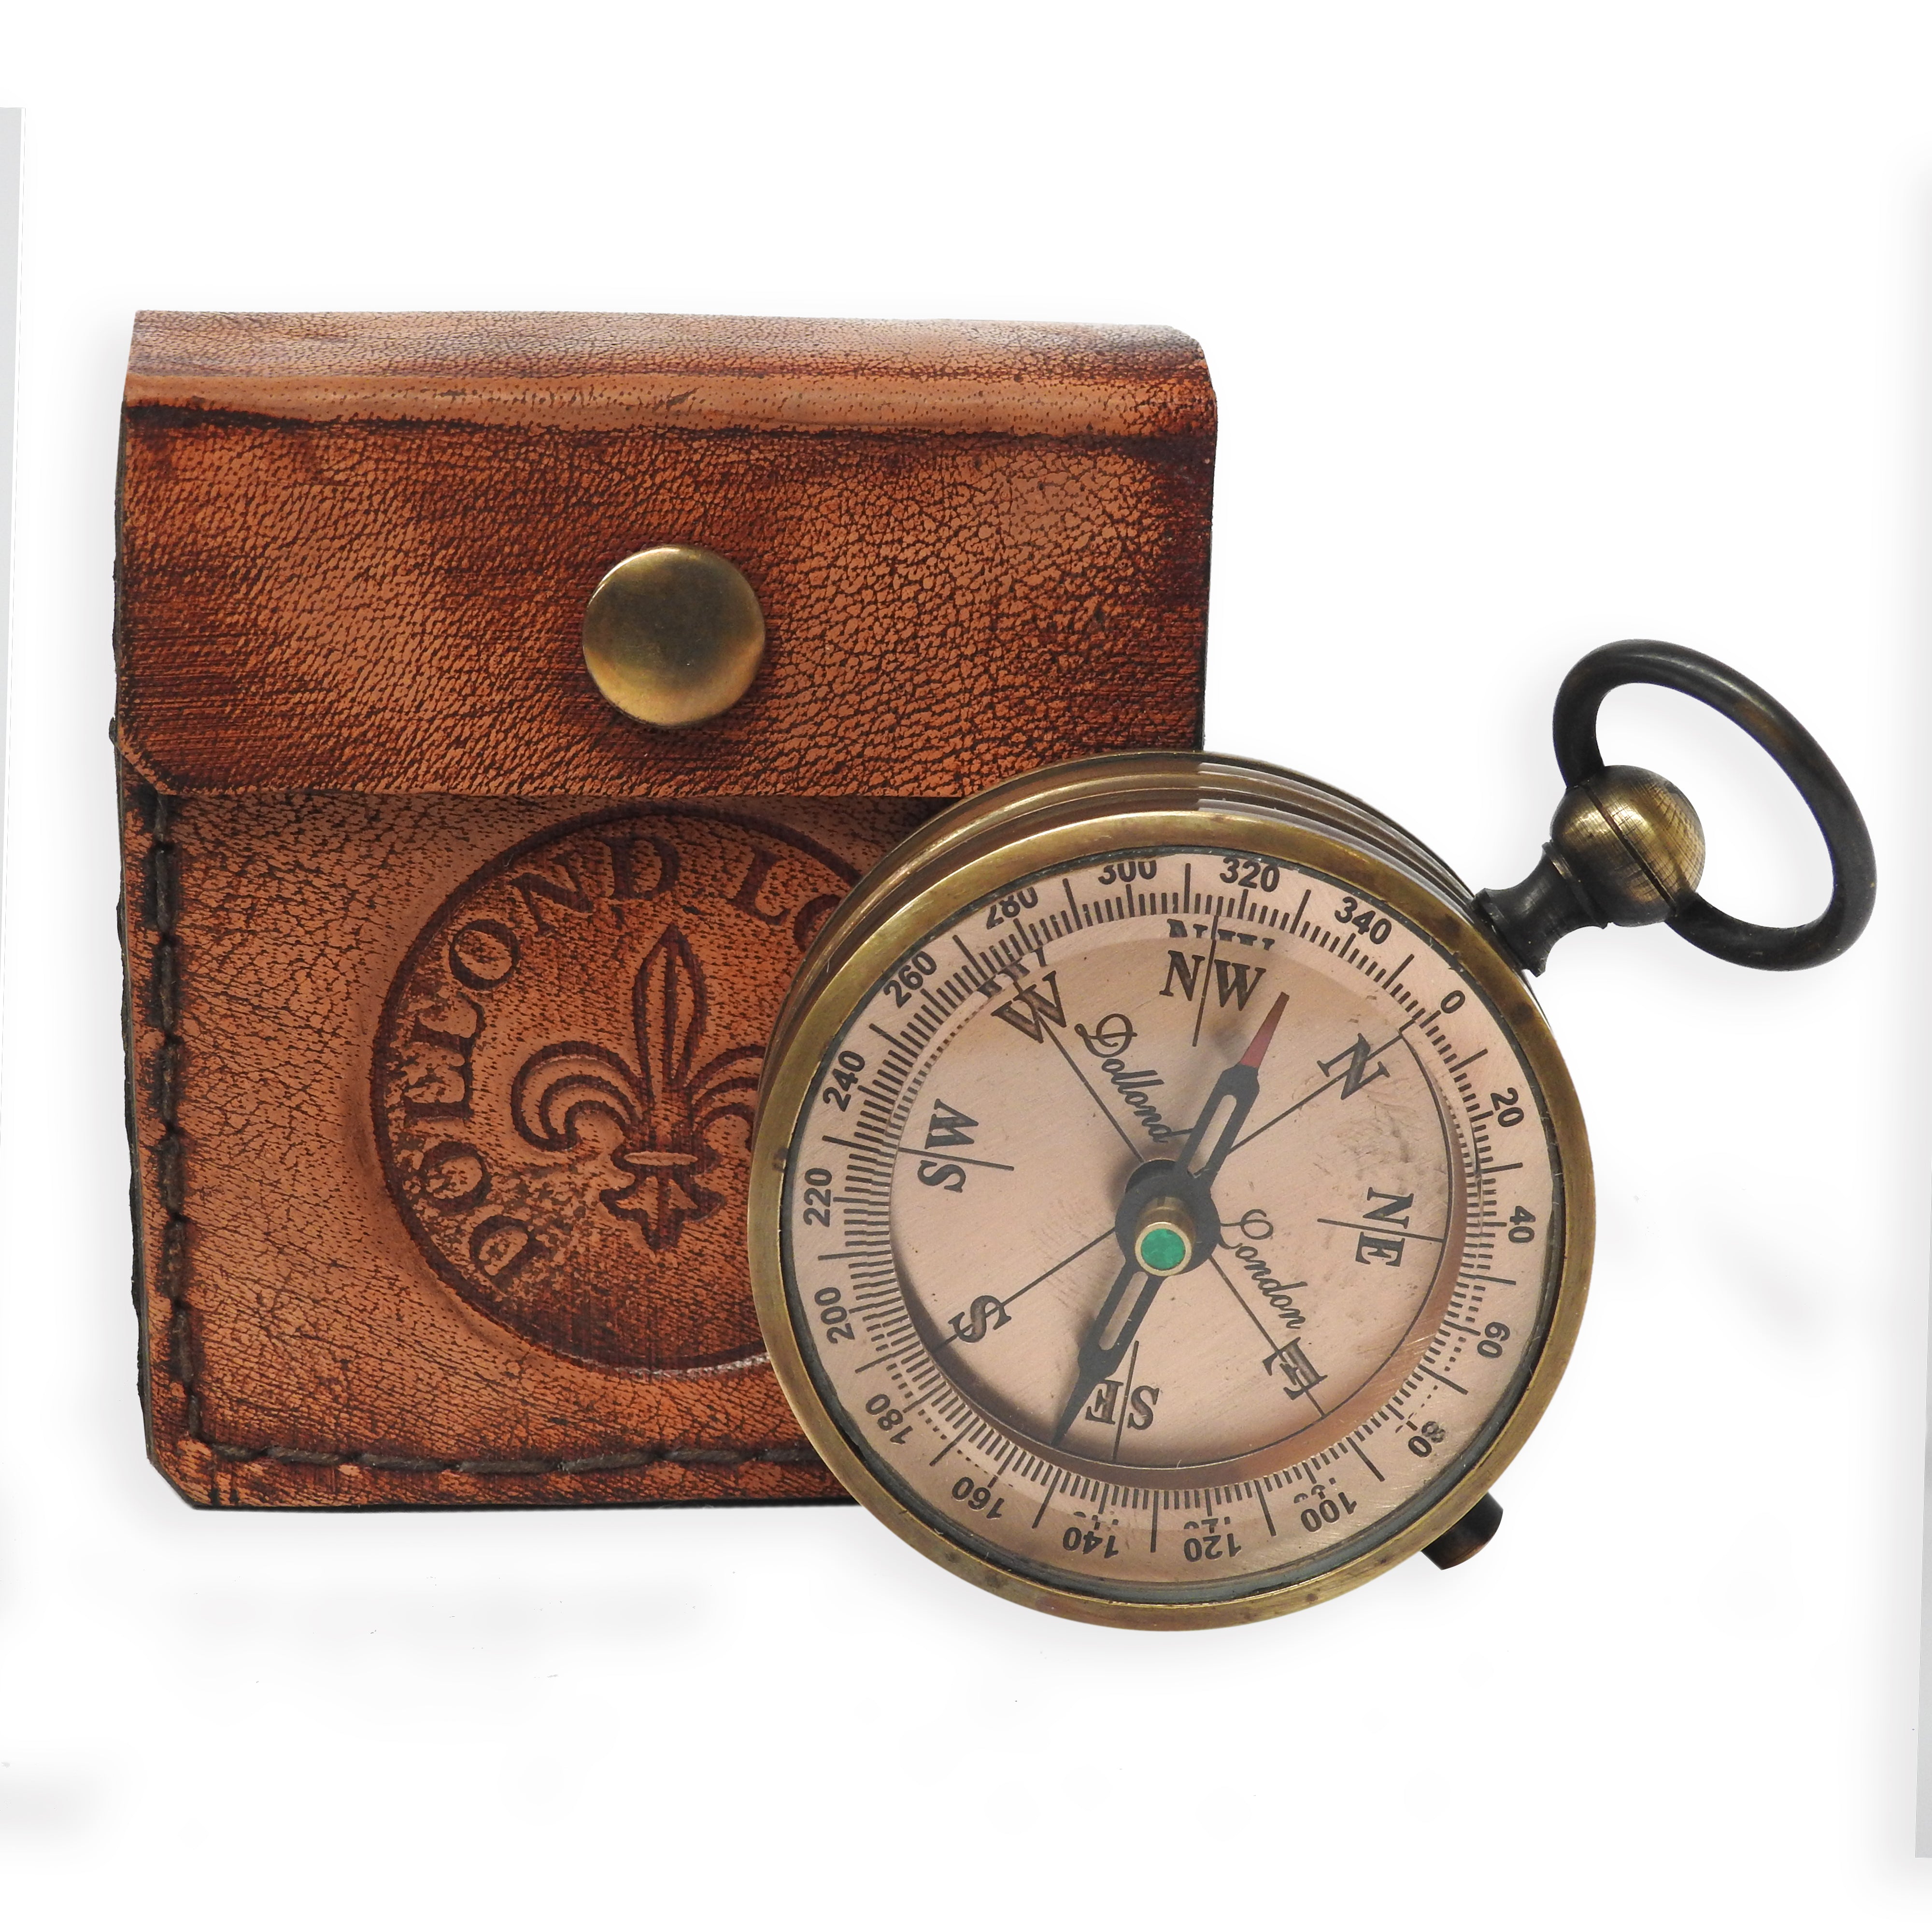 Dollond Copper Dial Compass